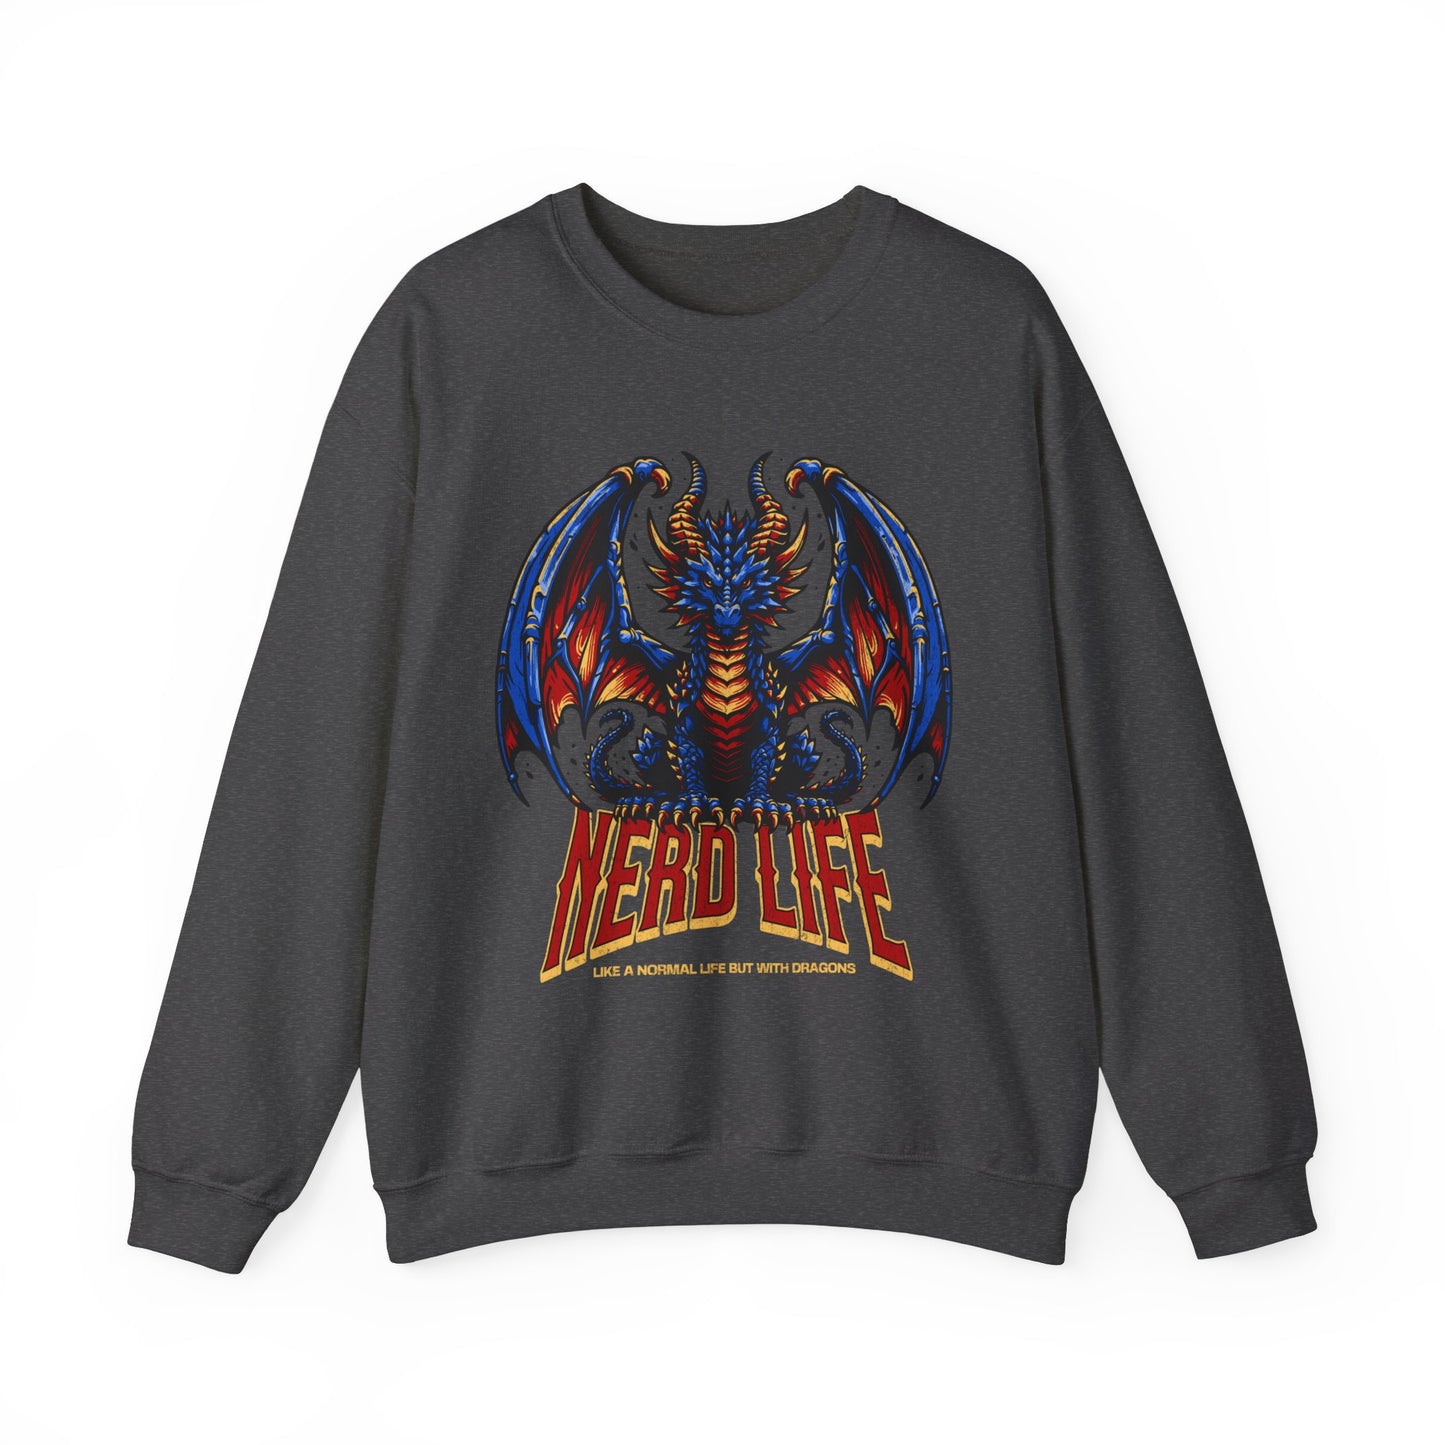 Nerd Life Like A Normal Life But With Dragons Sweatshirt, D&D Inspired Sweatshirt